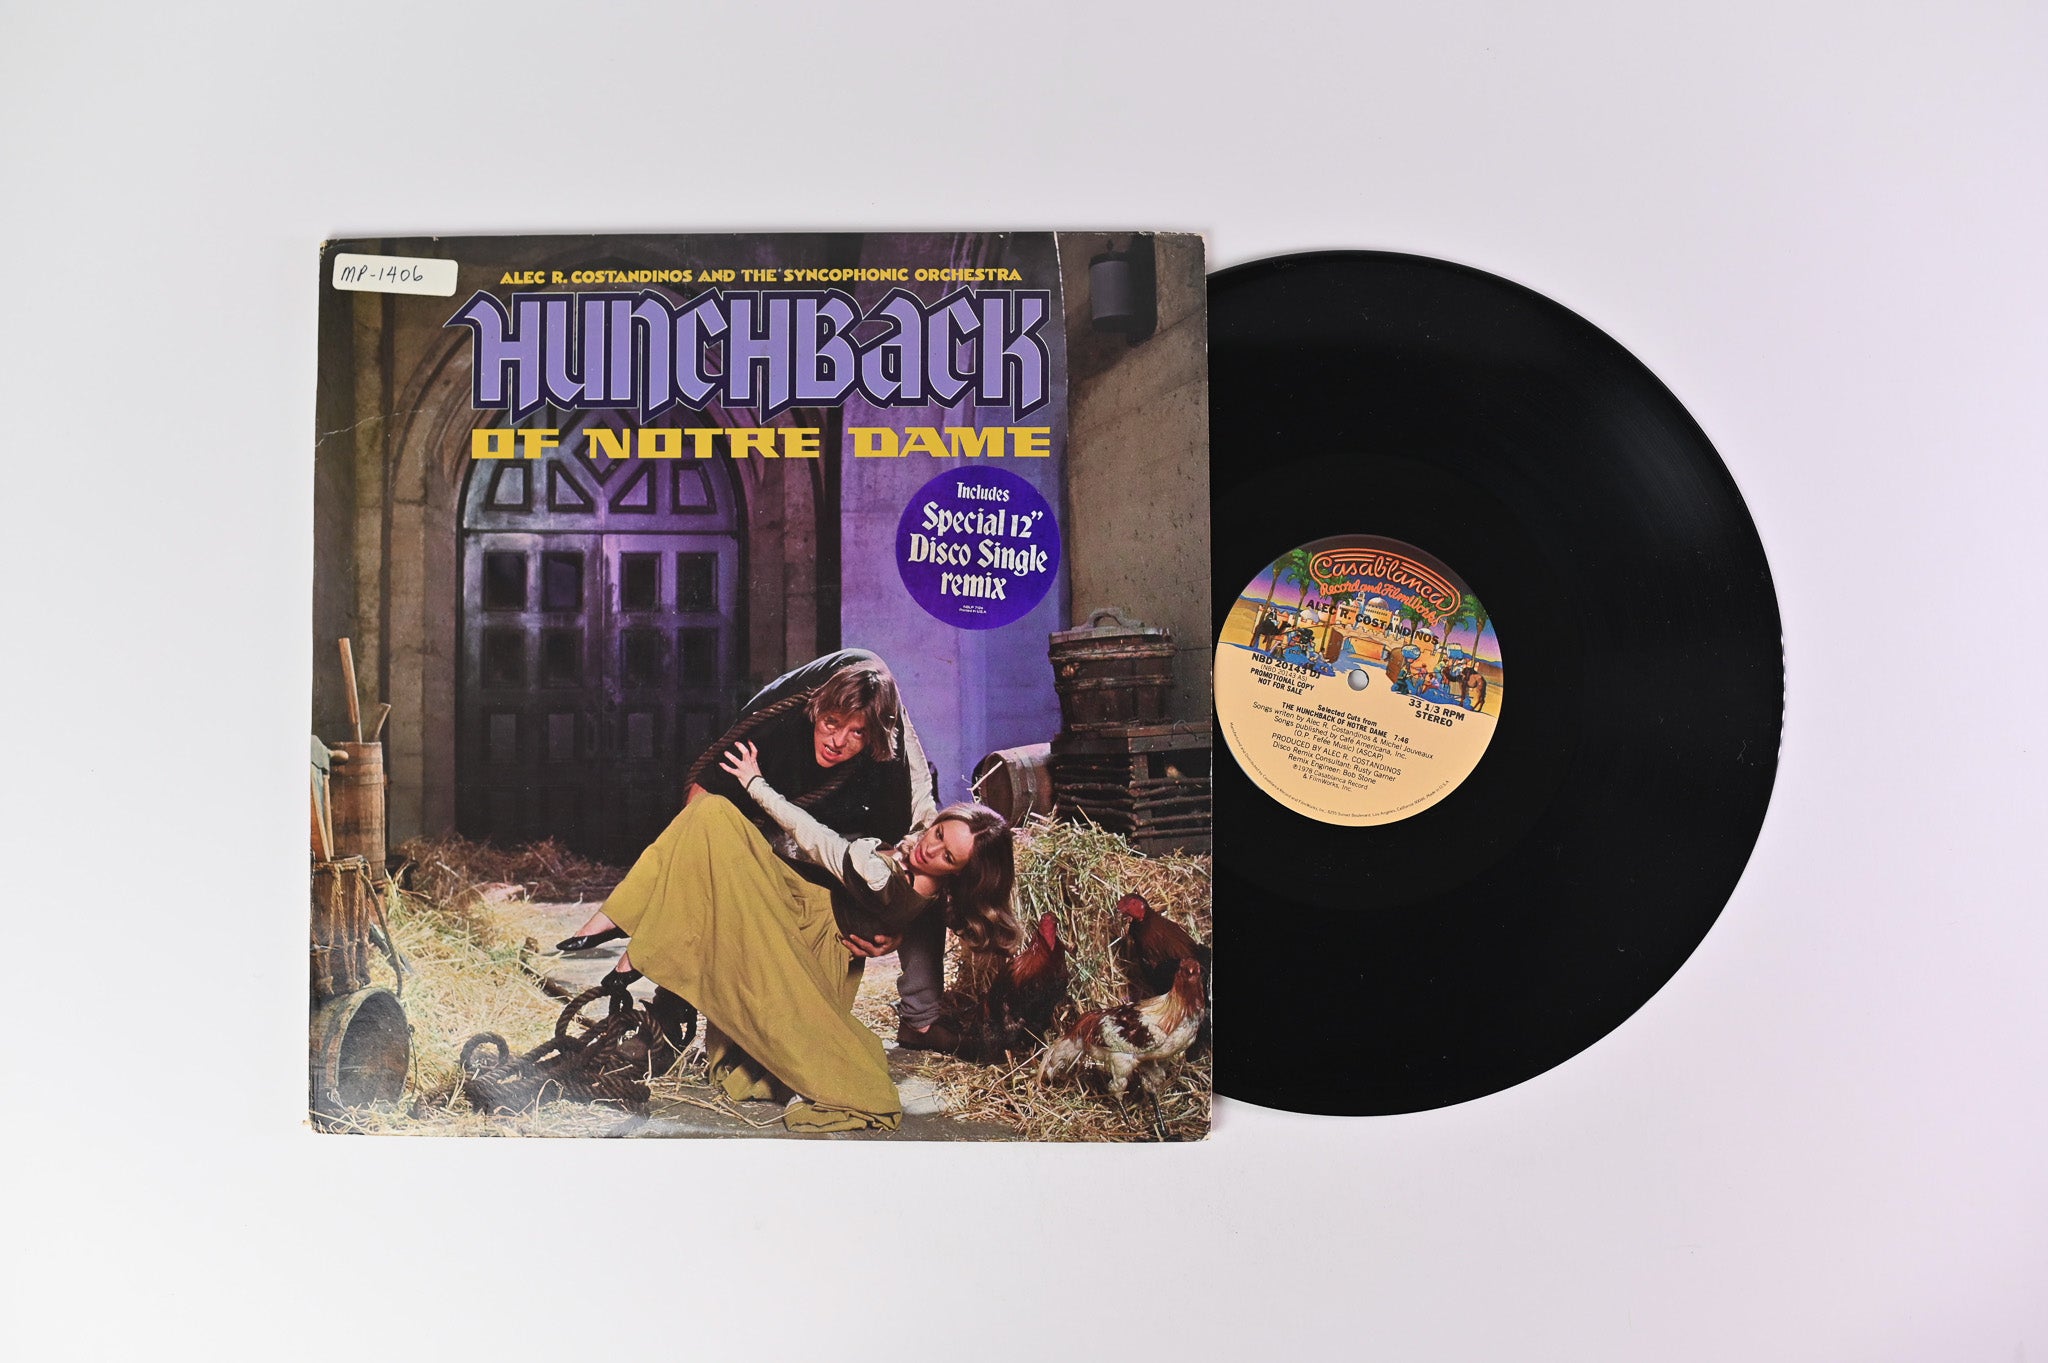 Alec R. Costandinos - The Hunchback Of Notre Dame (Includes Special 12" Disco Single Remix) on Casablanca